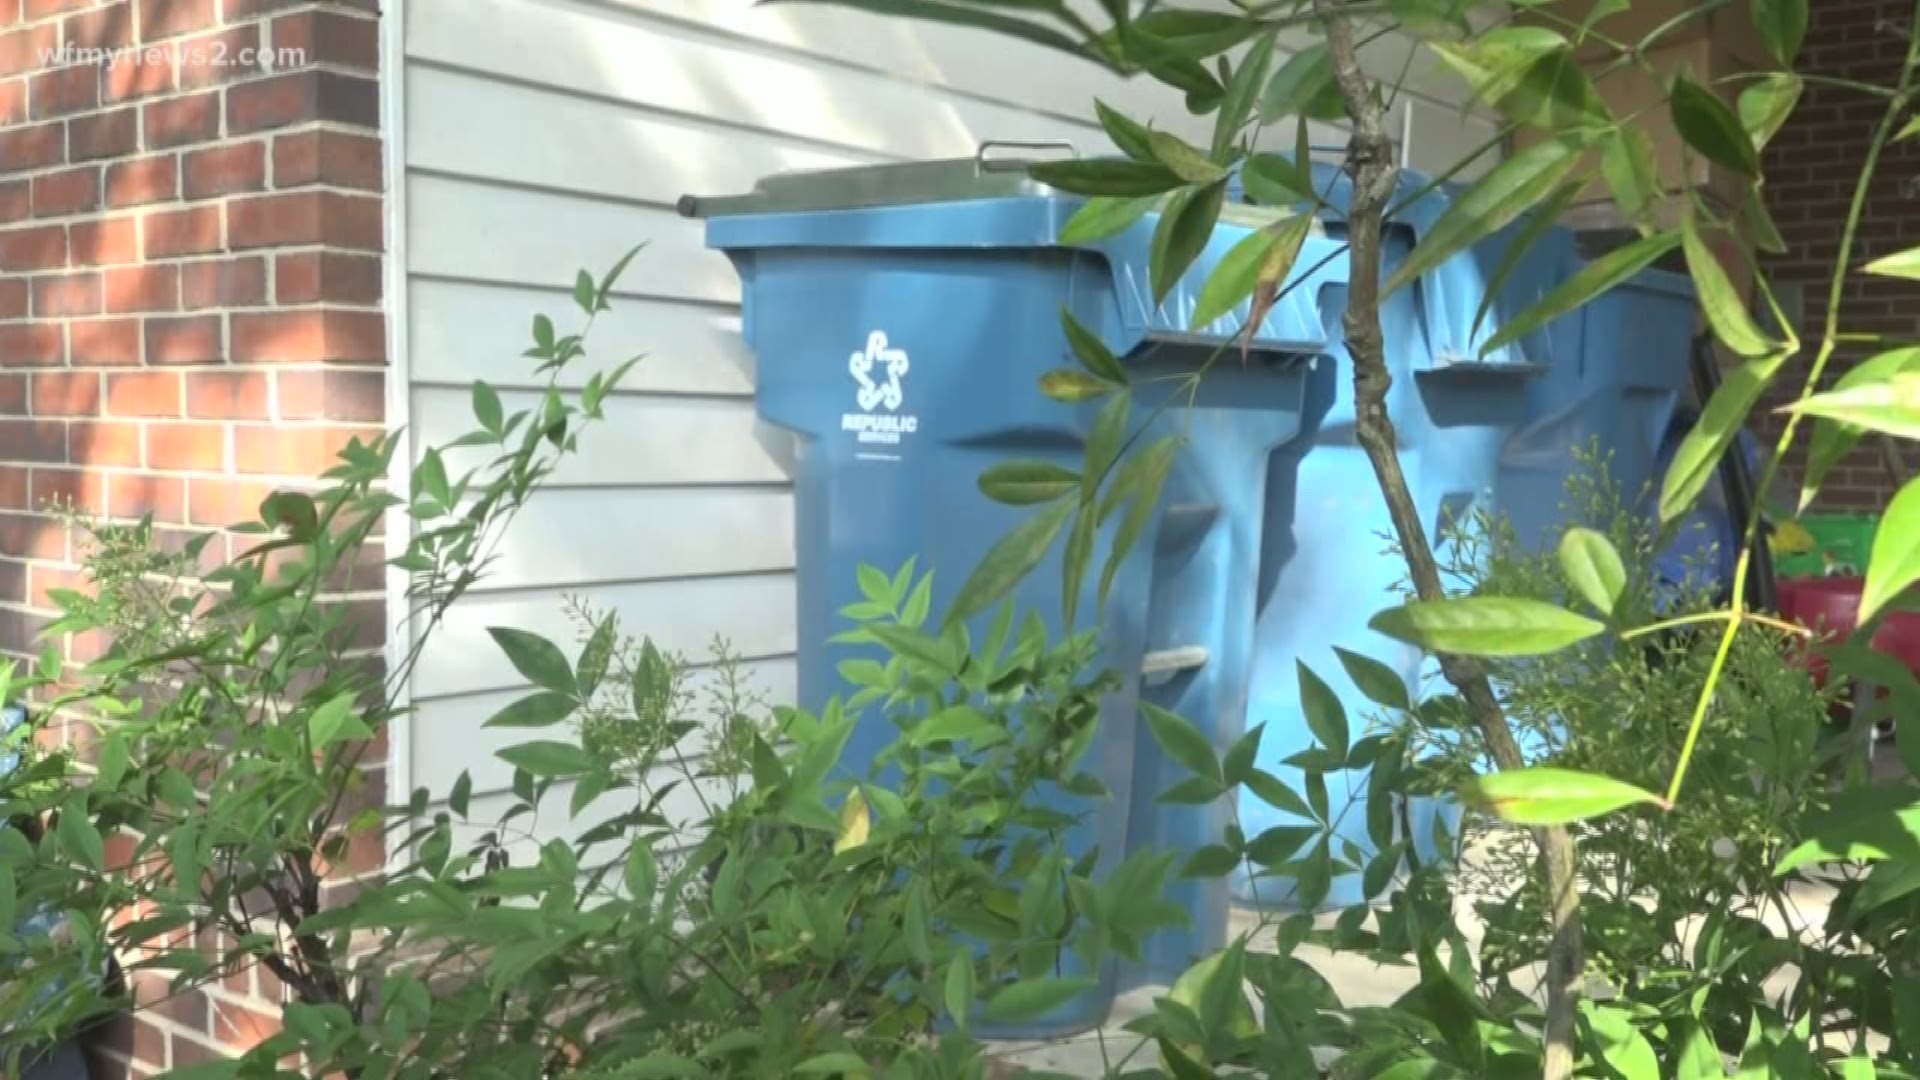 People who live in Jamestown say they're fed up with their recycling pick up service.
They complained about things like missed pick ups --and poor response to customer complaints.
Some said they took the recyclables to the landfill, themselves.